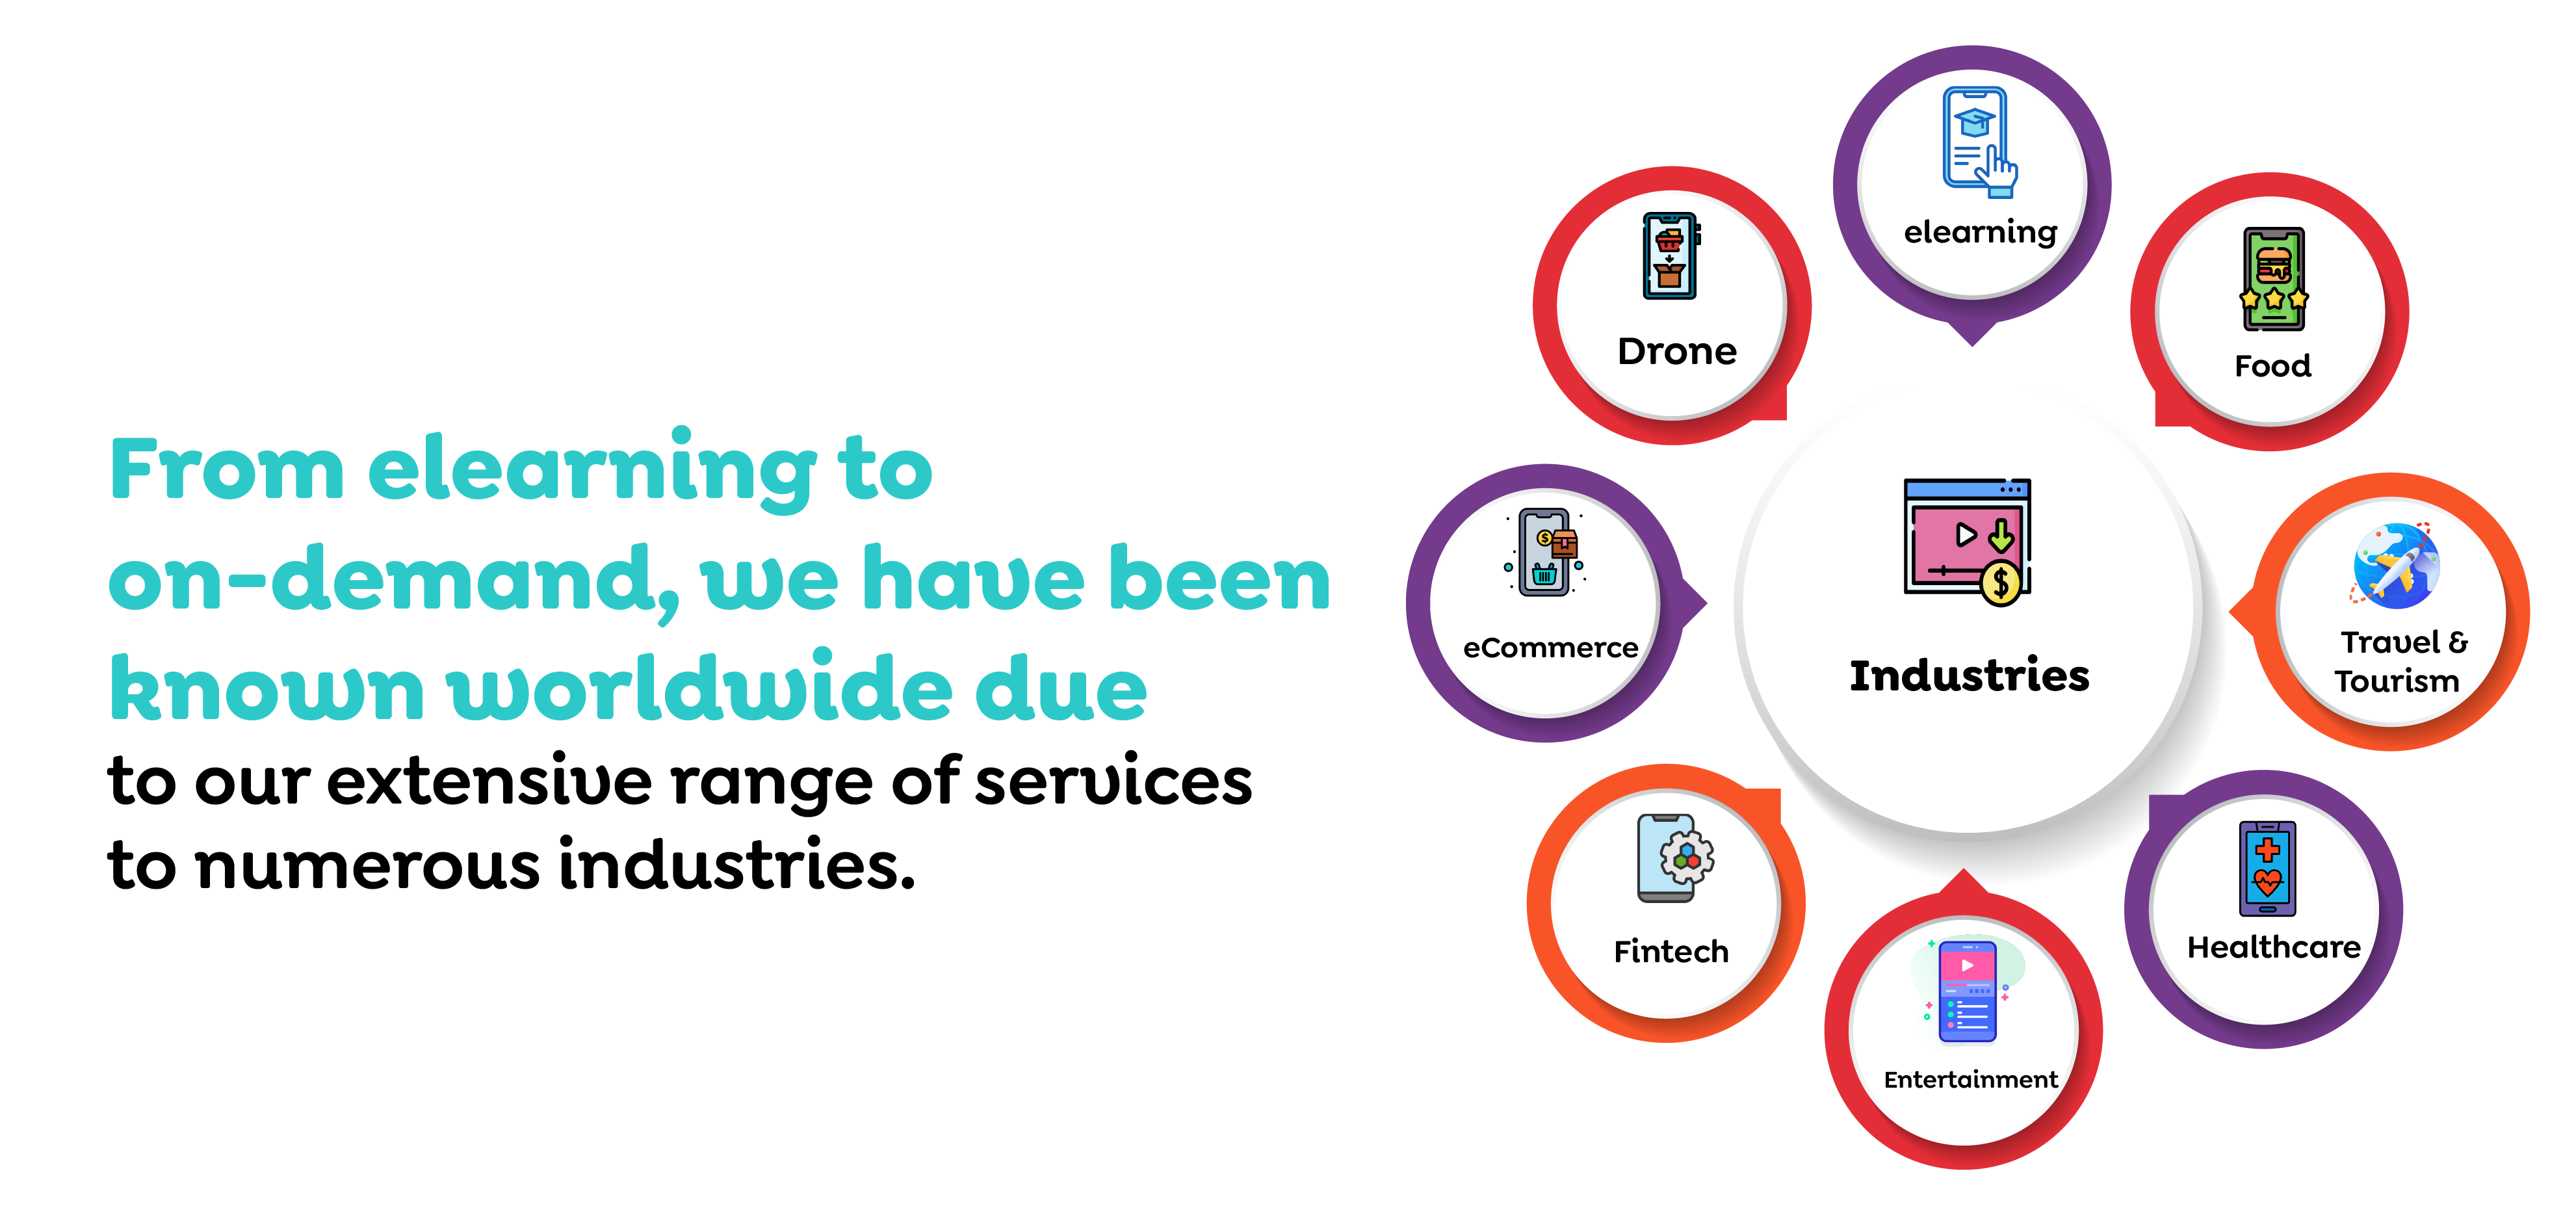 From e-learning to on-demand, we have been known worldwide due to our extensive range of services to numerous industries